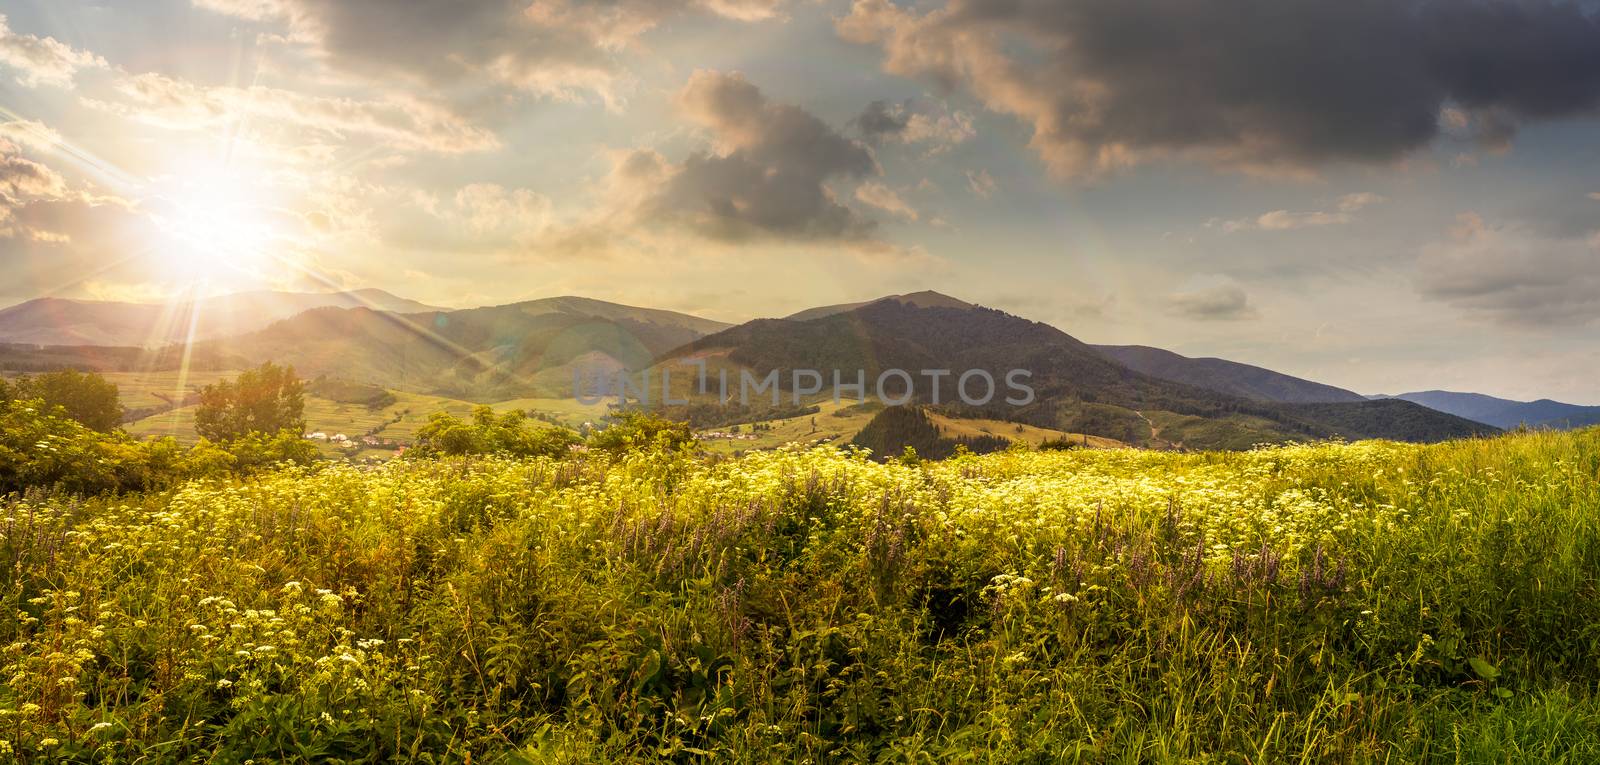 meadow with flowers in mountains at sunset by Pellinni